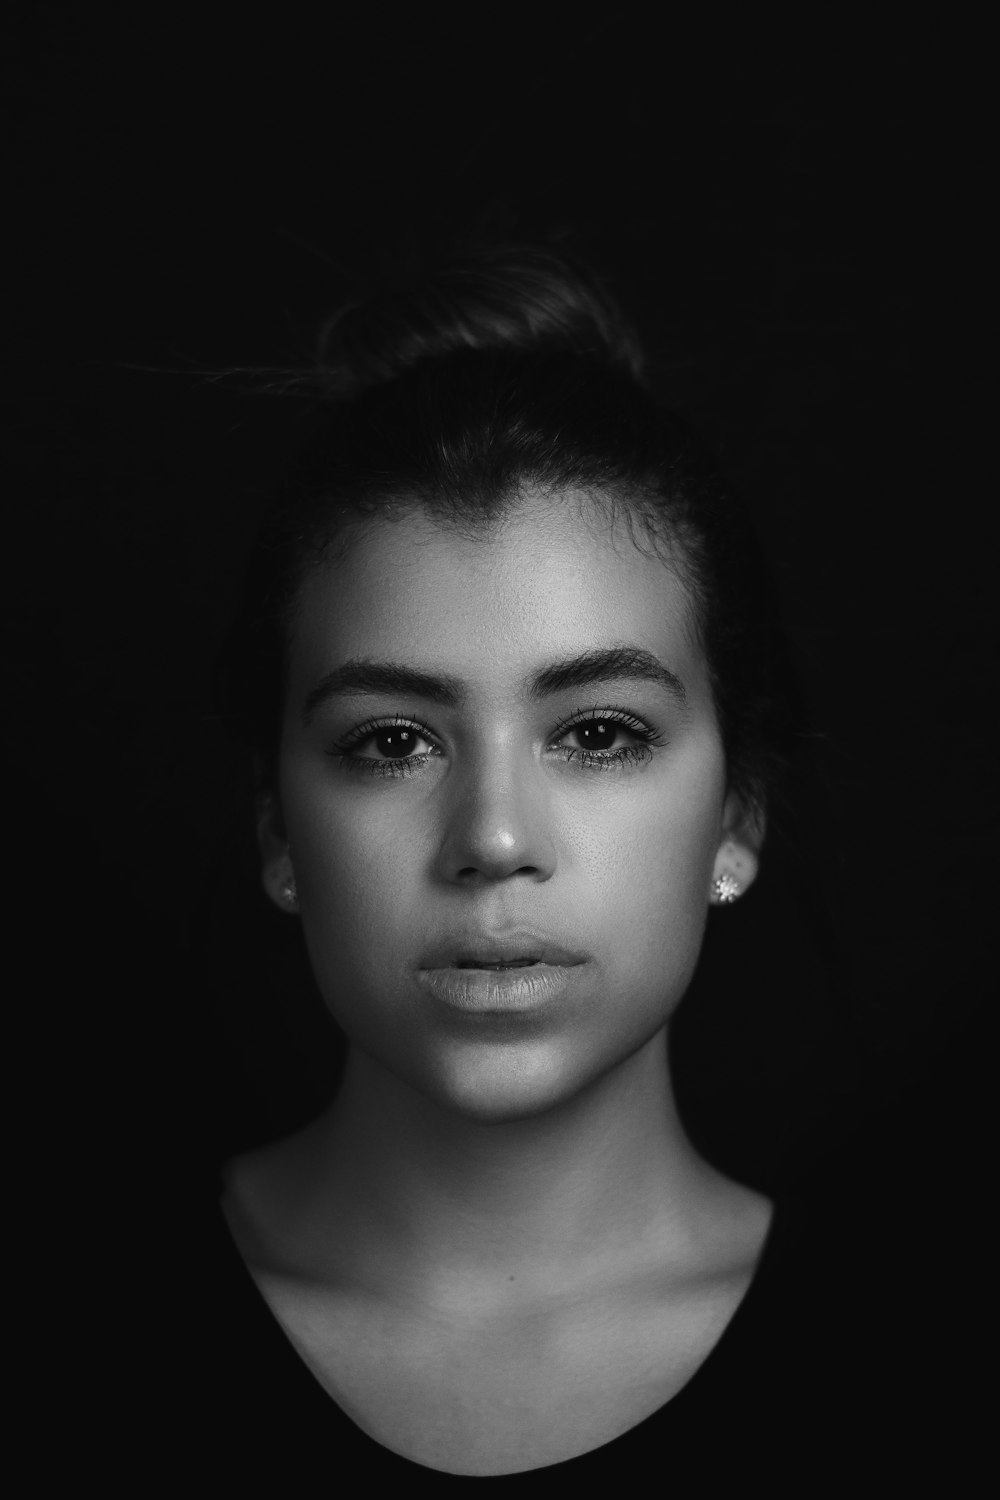 grayscale photo of women's face